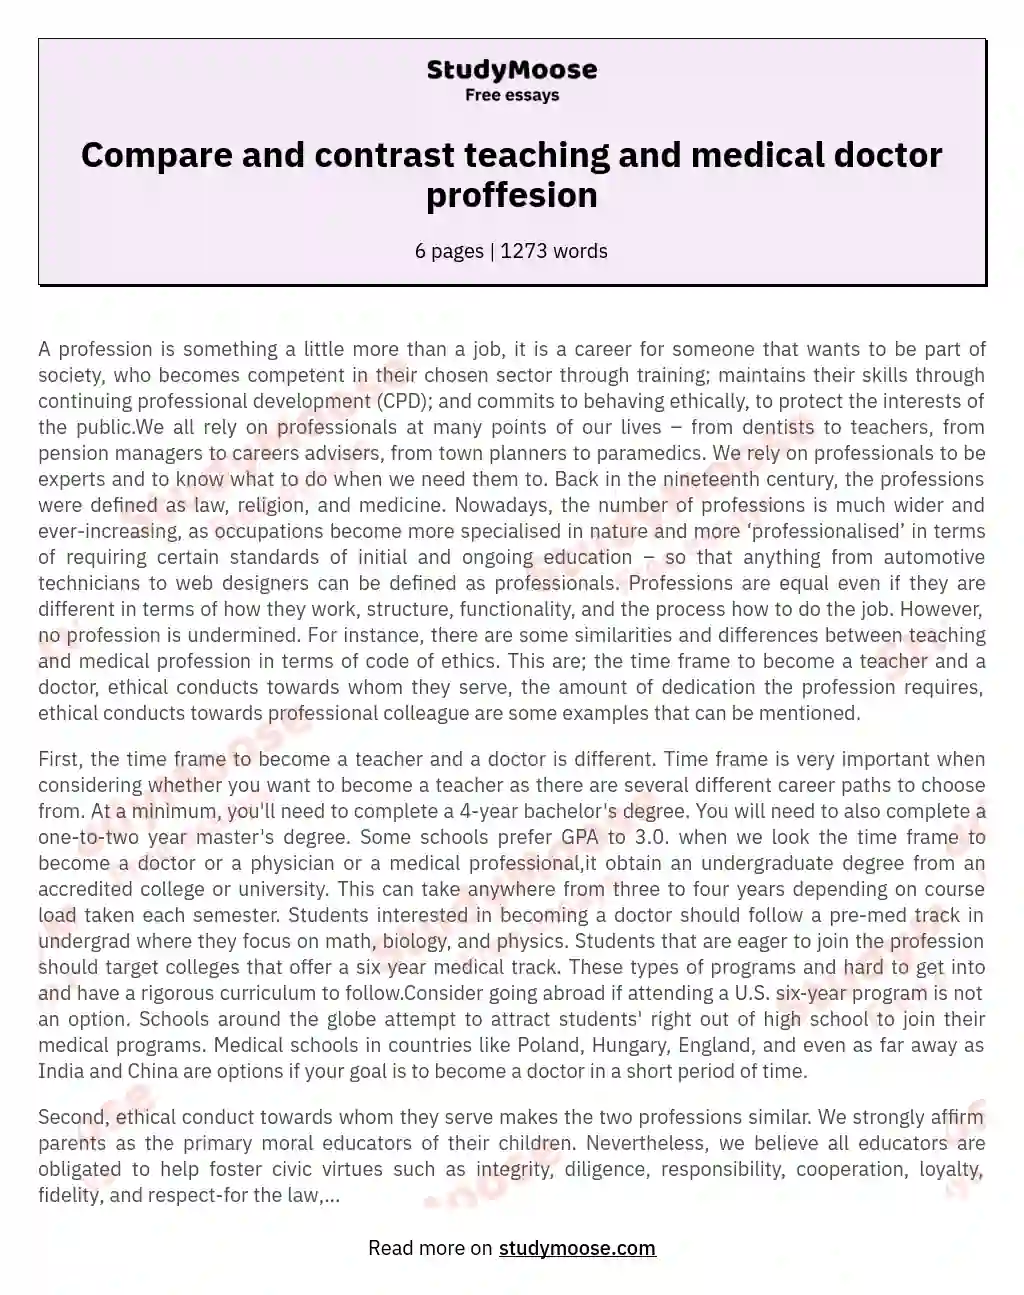 Compare and contrast teaching and medical doctor proffesion essay